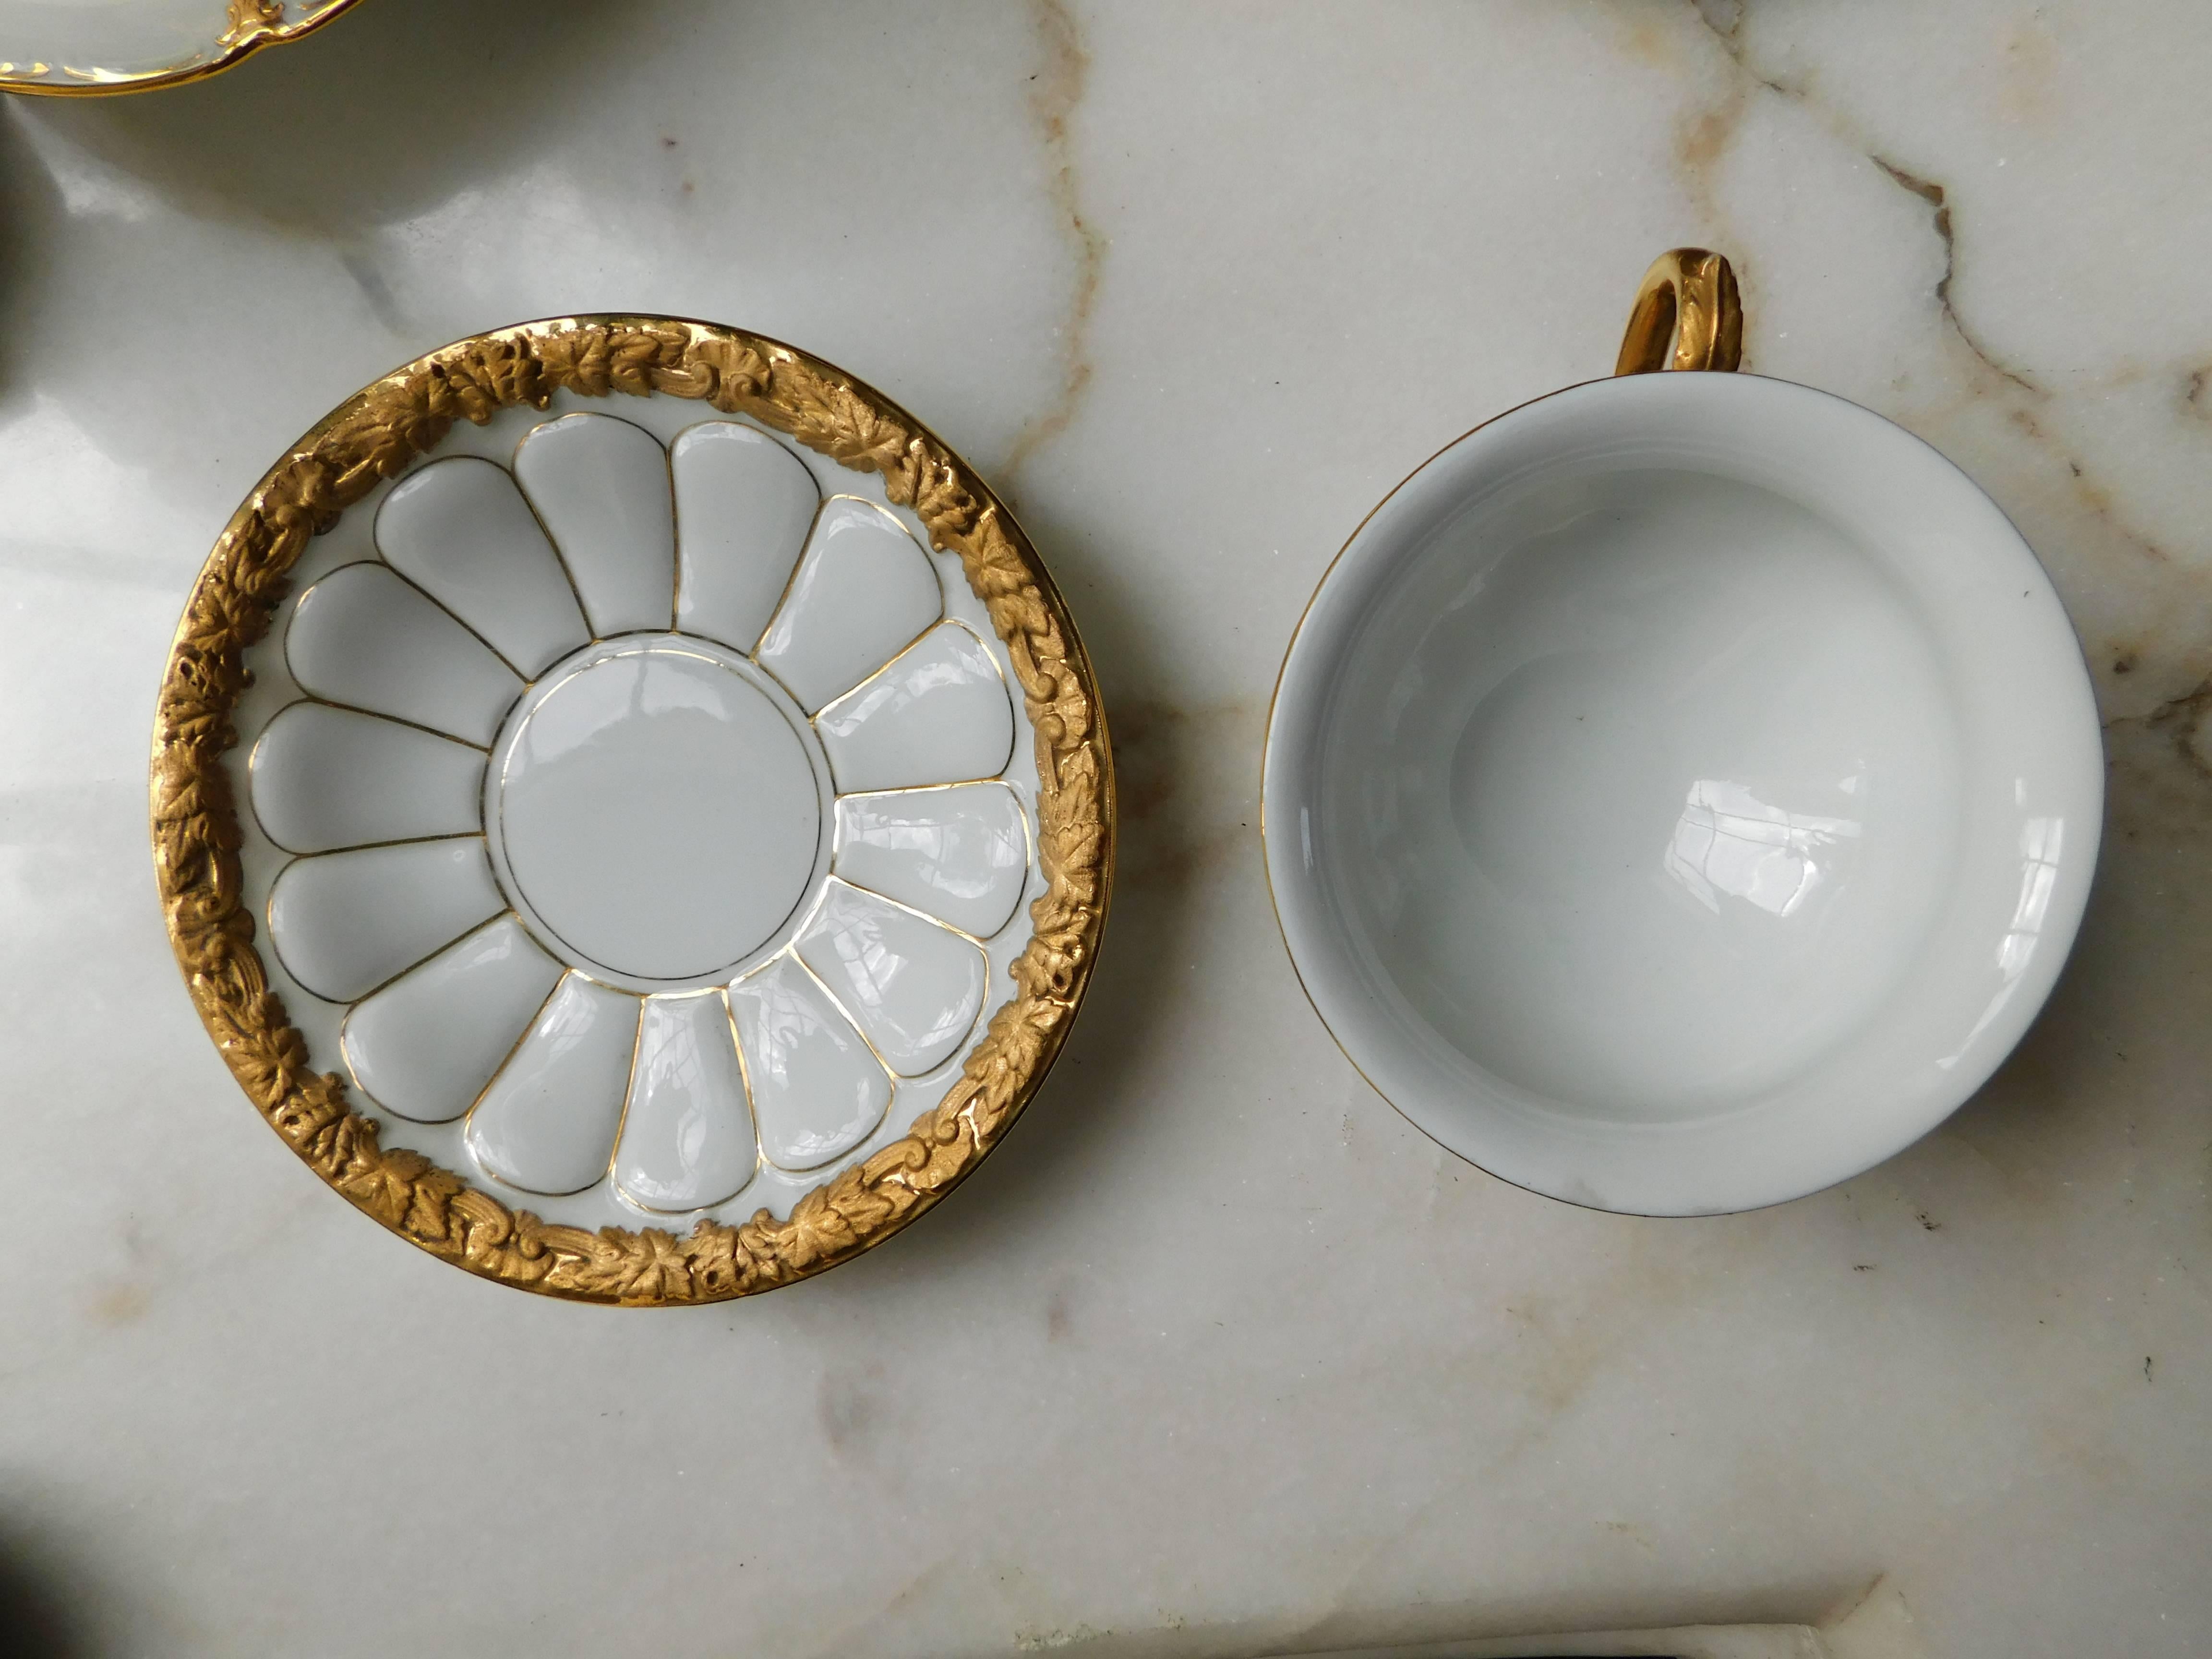 19th century Meissen Porcelain cup and saucer white and gold trim.
Measure: Saucer 6in D, 1in H
Cup 3.13in D, 2.75 in H

Meissen Porcelain or Meissen china is the first European hard-paste porcelain. It was developed starting in 1708 by